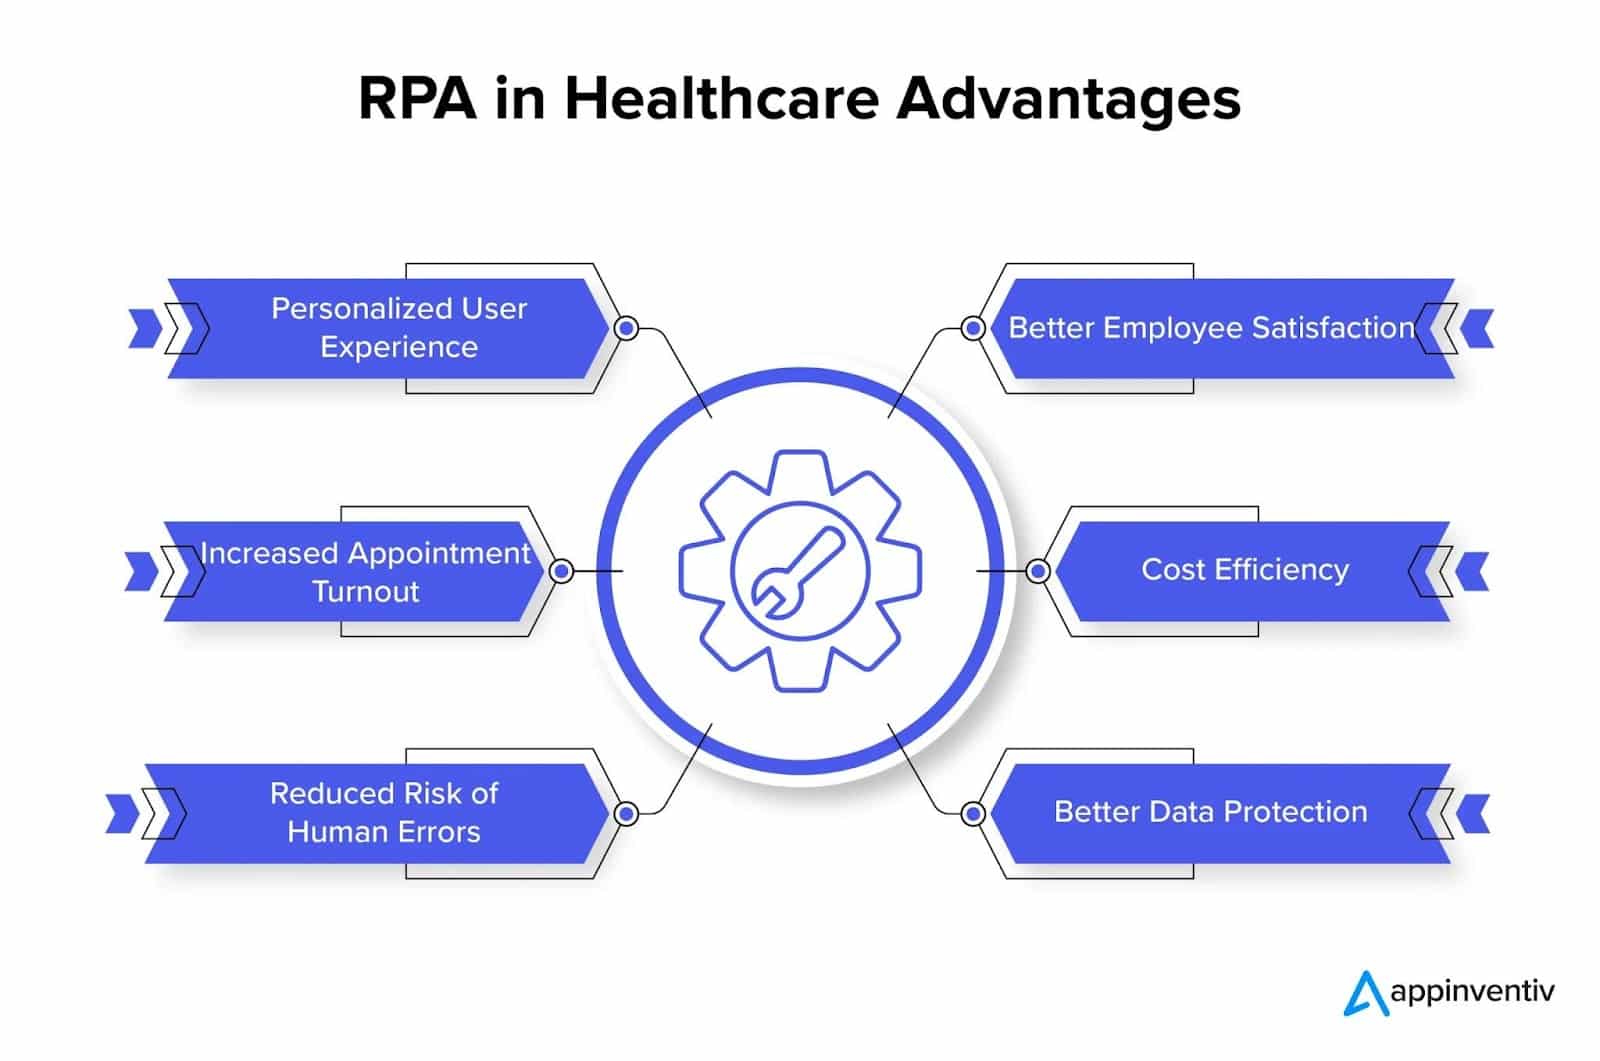 Advantages of RPA in healthcare - Image source: Appinventiv